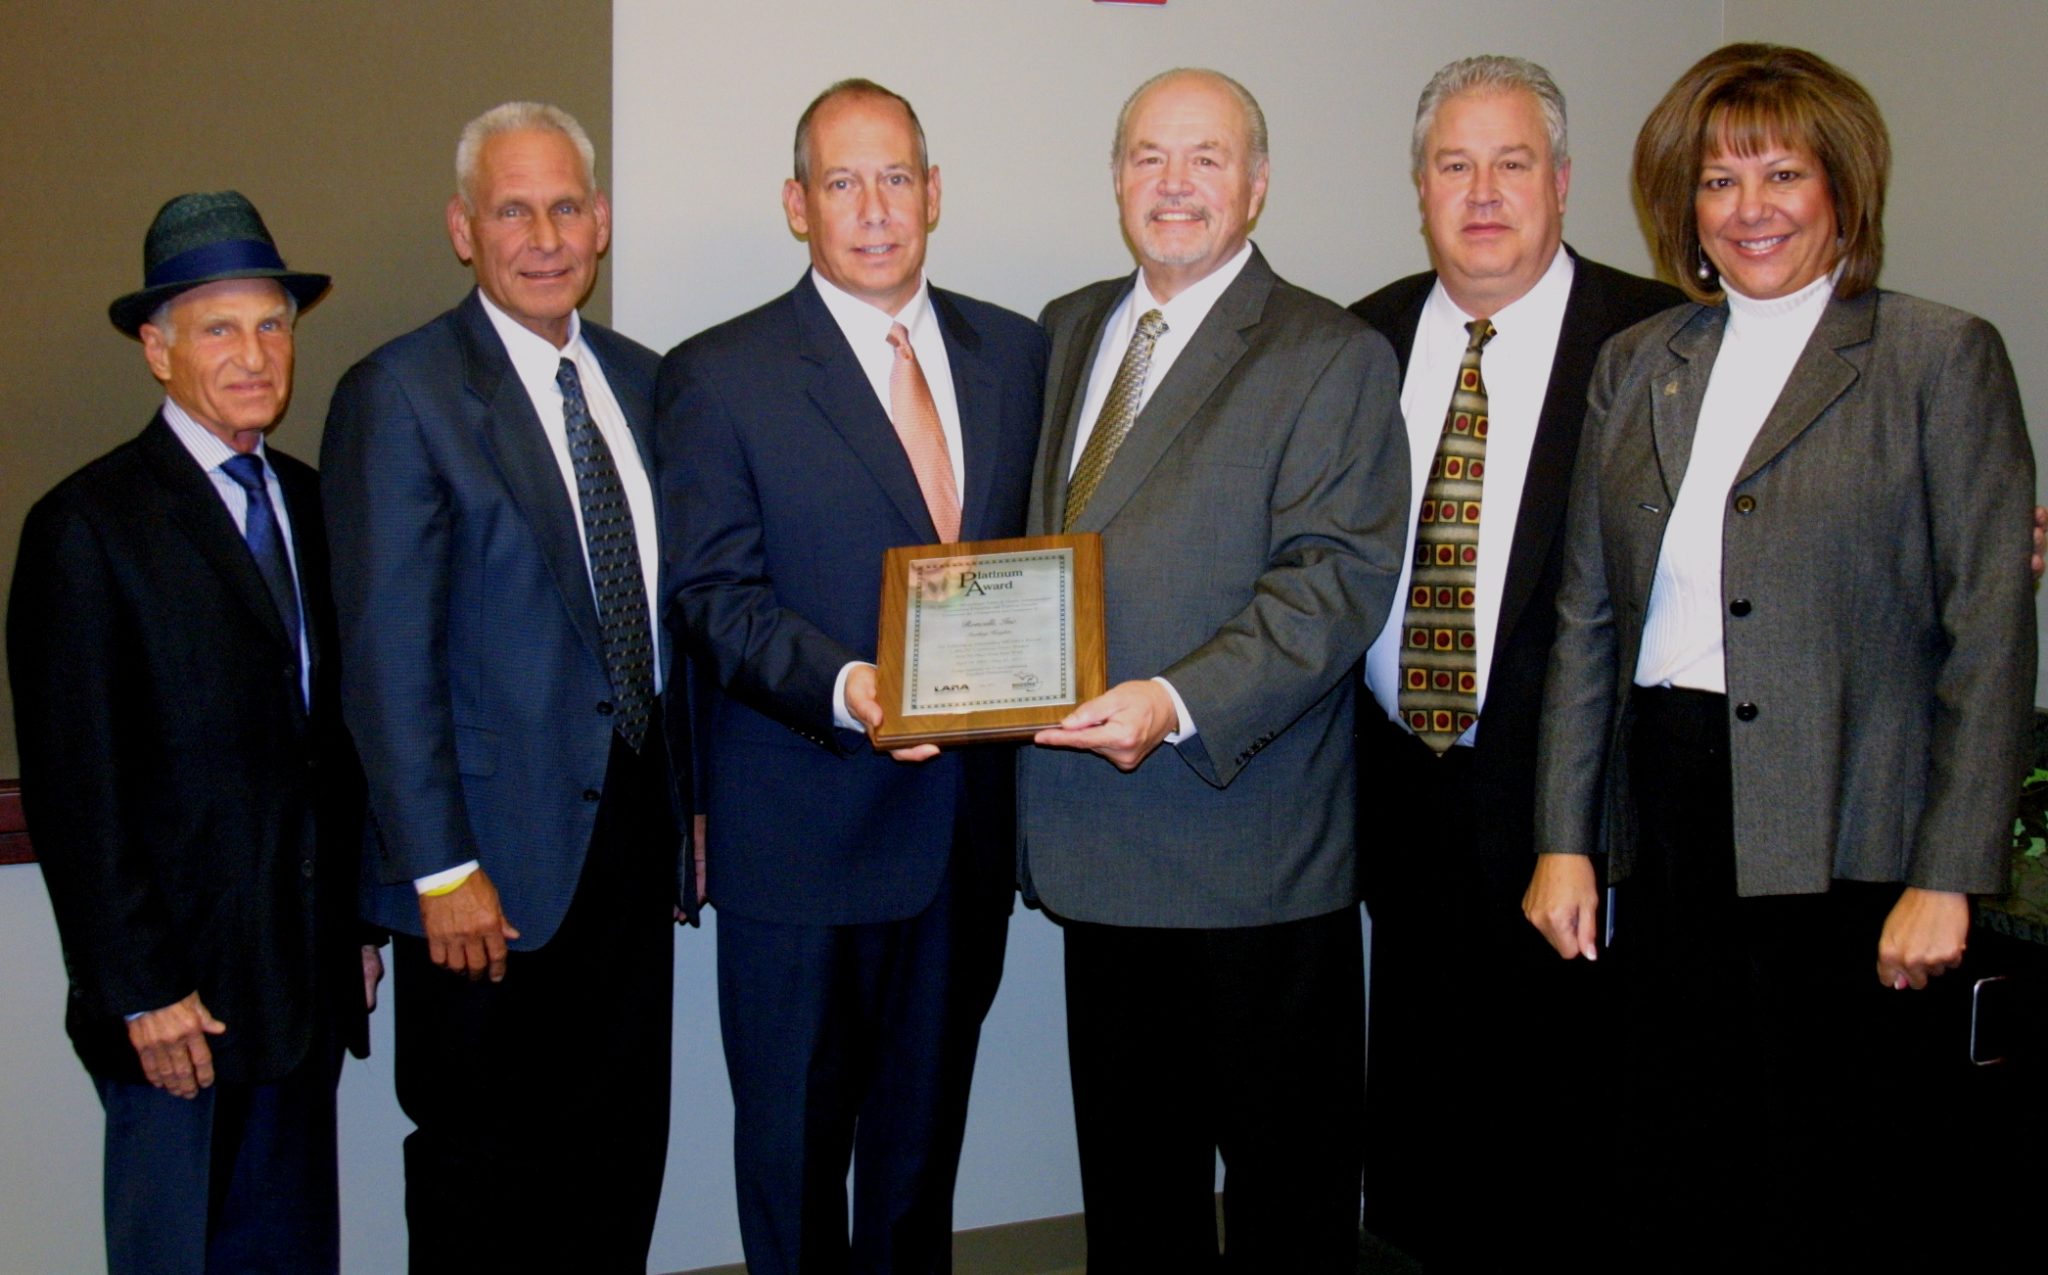 Roncelli, Inc. Receives State Award for Outstanding Safety and Health Record